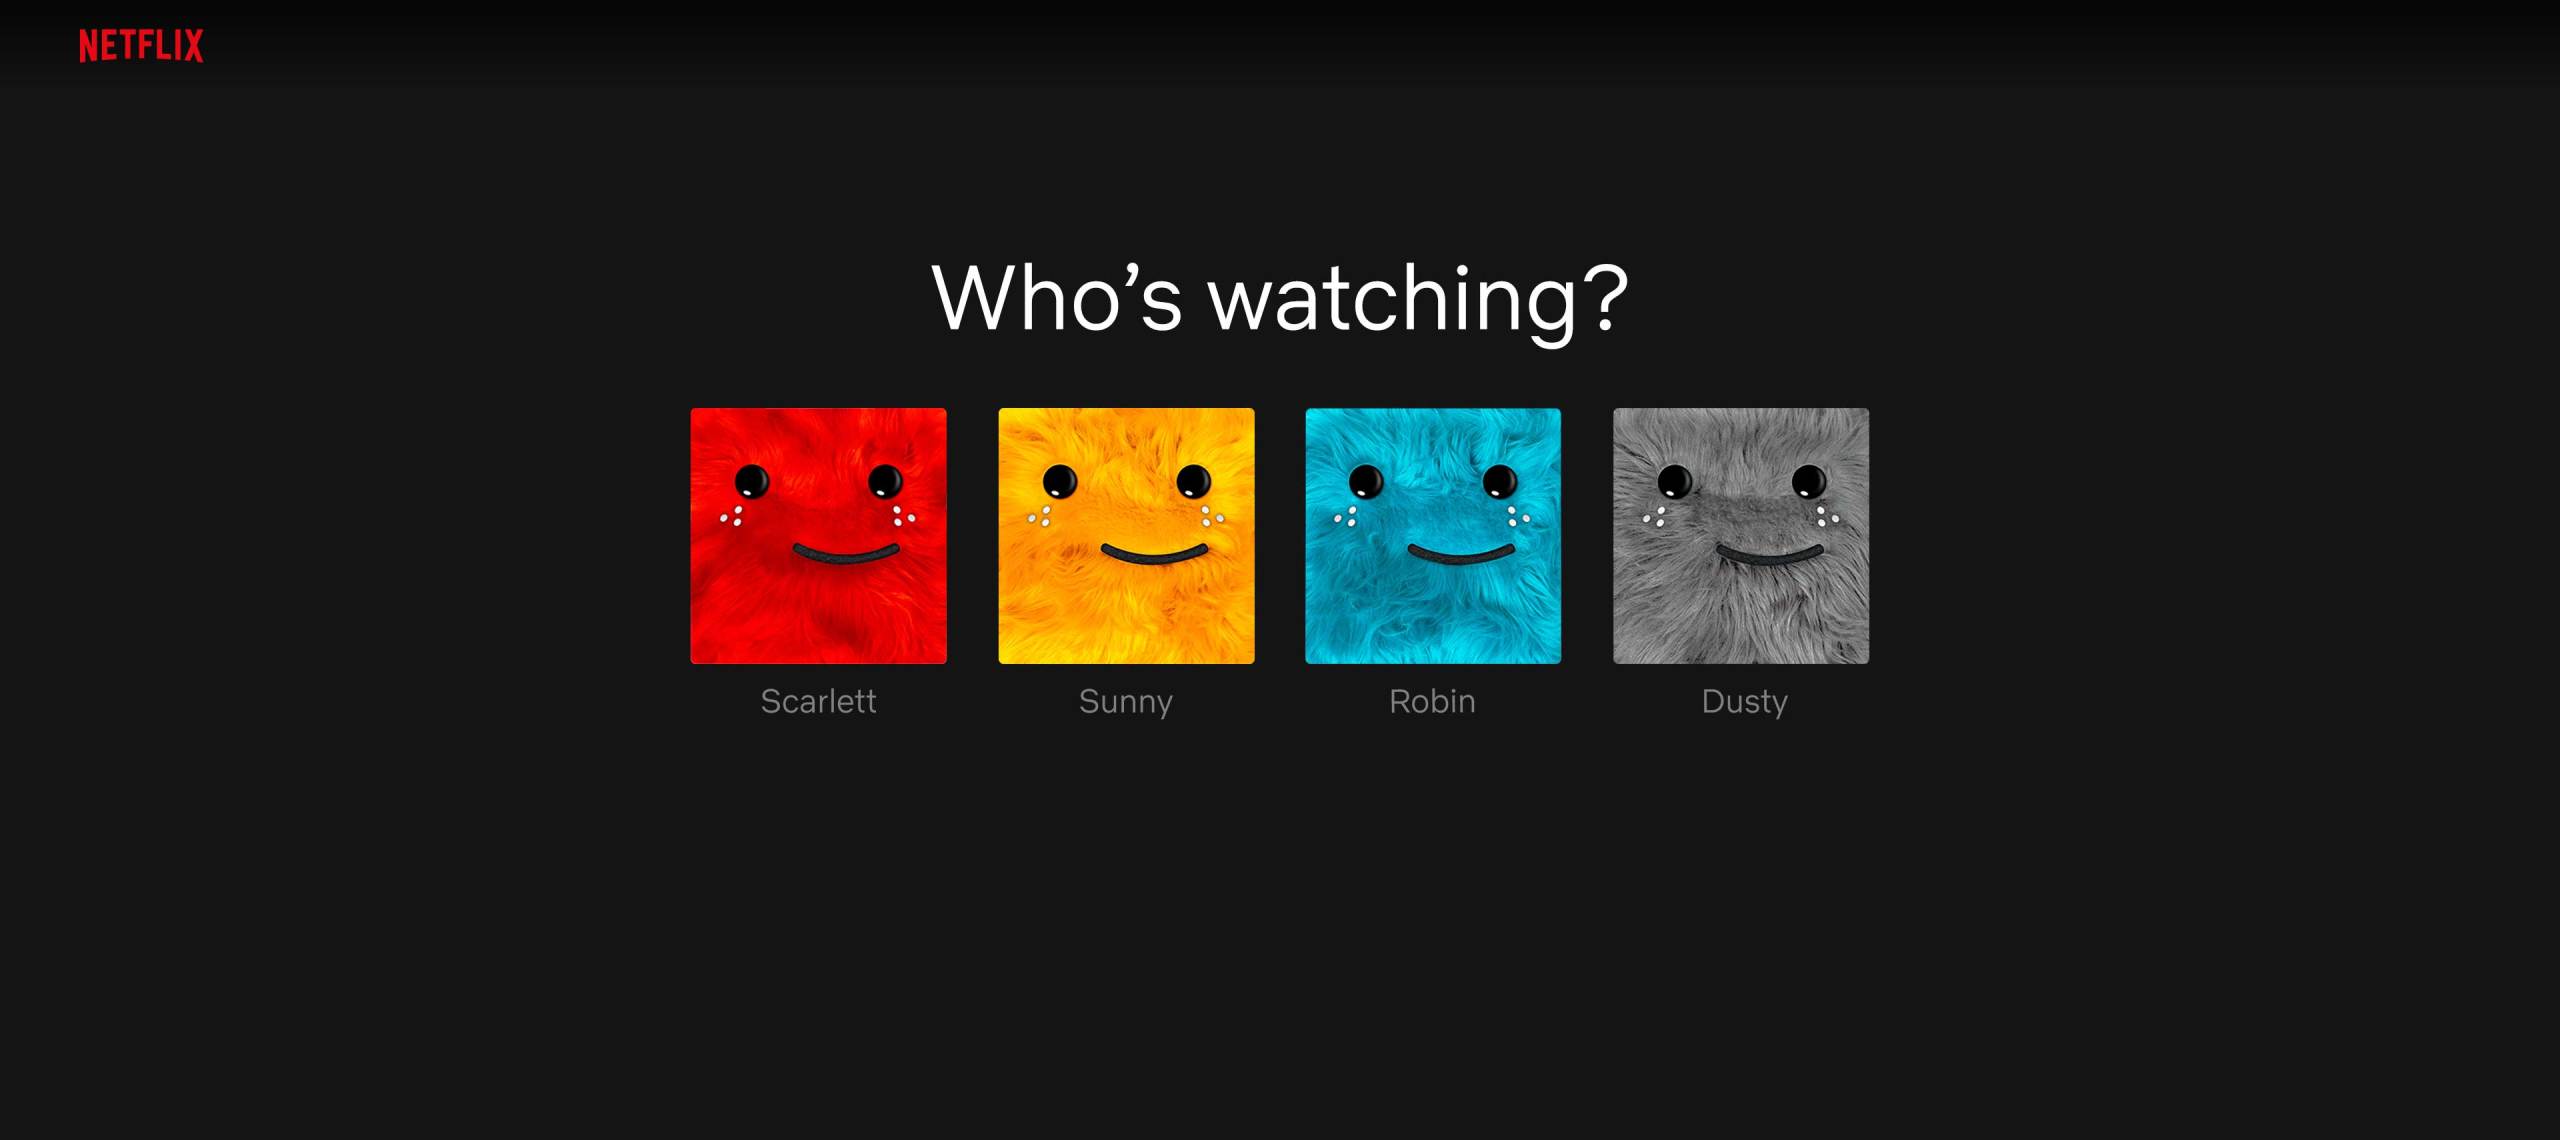 Streaming Buddies 2024: Enjoy your favorite TV shows and movies with your friends and loved ones anytime, anywhere! With Netflix\'s streaming buddies, you can now invite anyone to watch with you remotely. Start a virtual movie night or binge-watch your favorite series together in 2024!